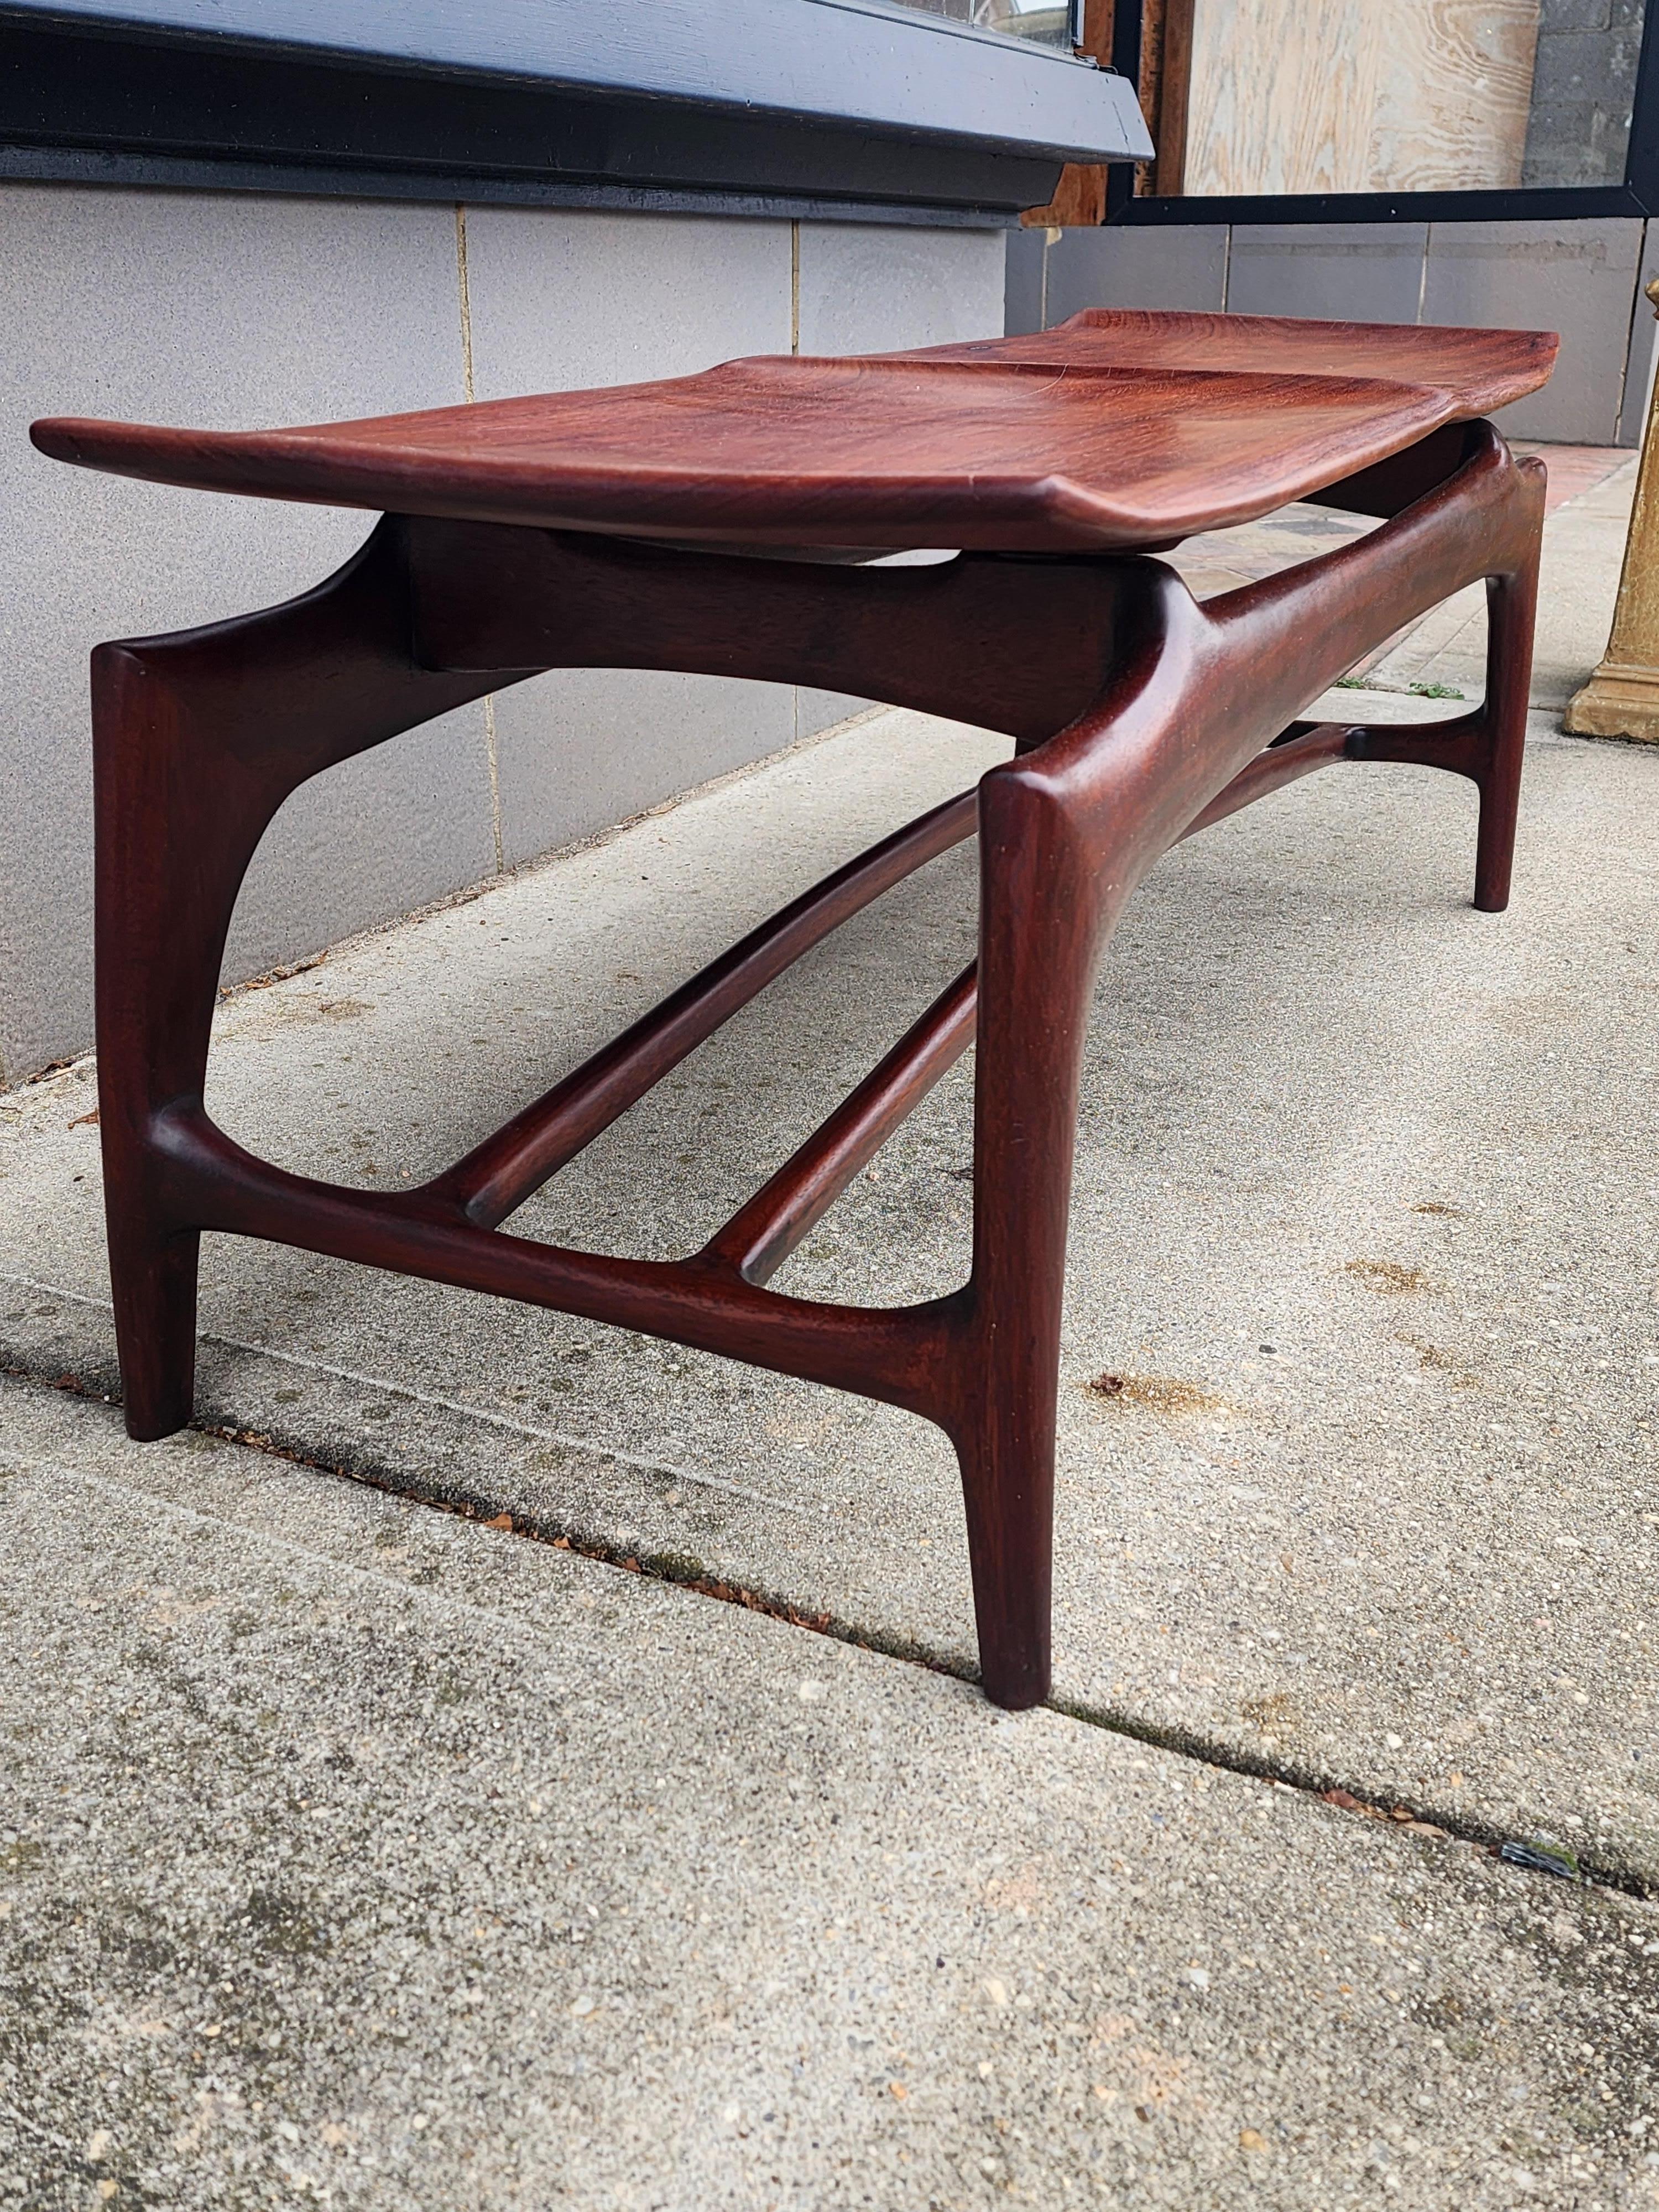 Vintage Rosewood Sculptural Studio Made Coffee Table or Bench In Good Condition For Sale In Kilmarnock, VA